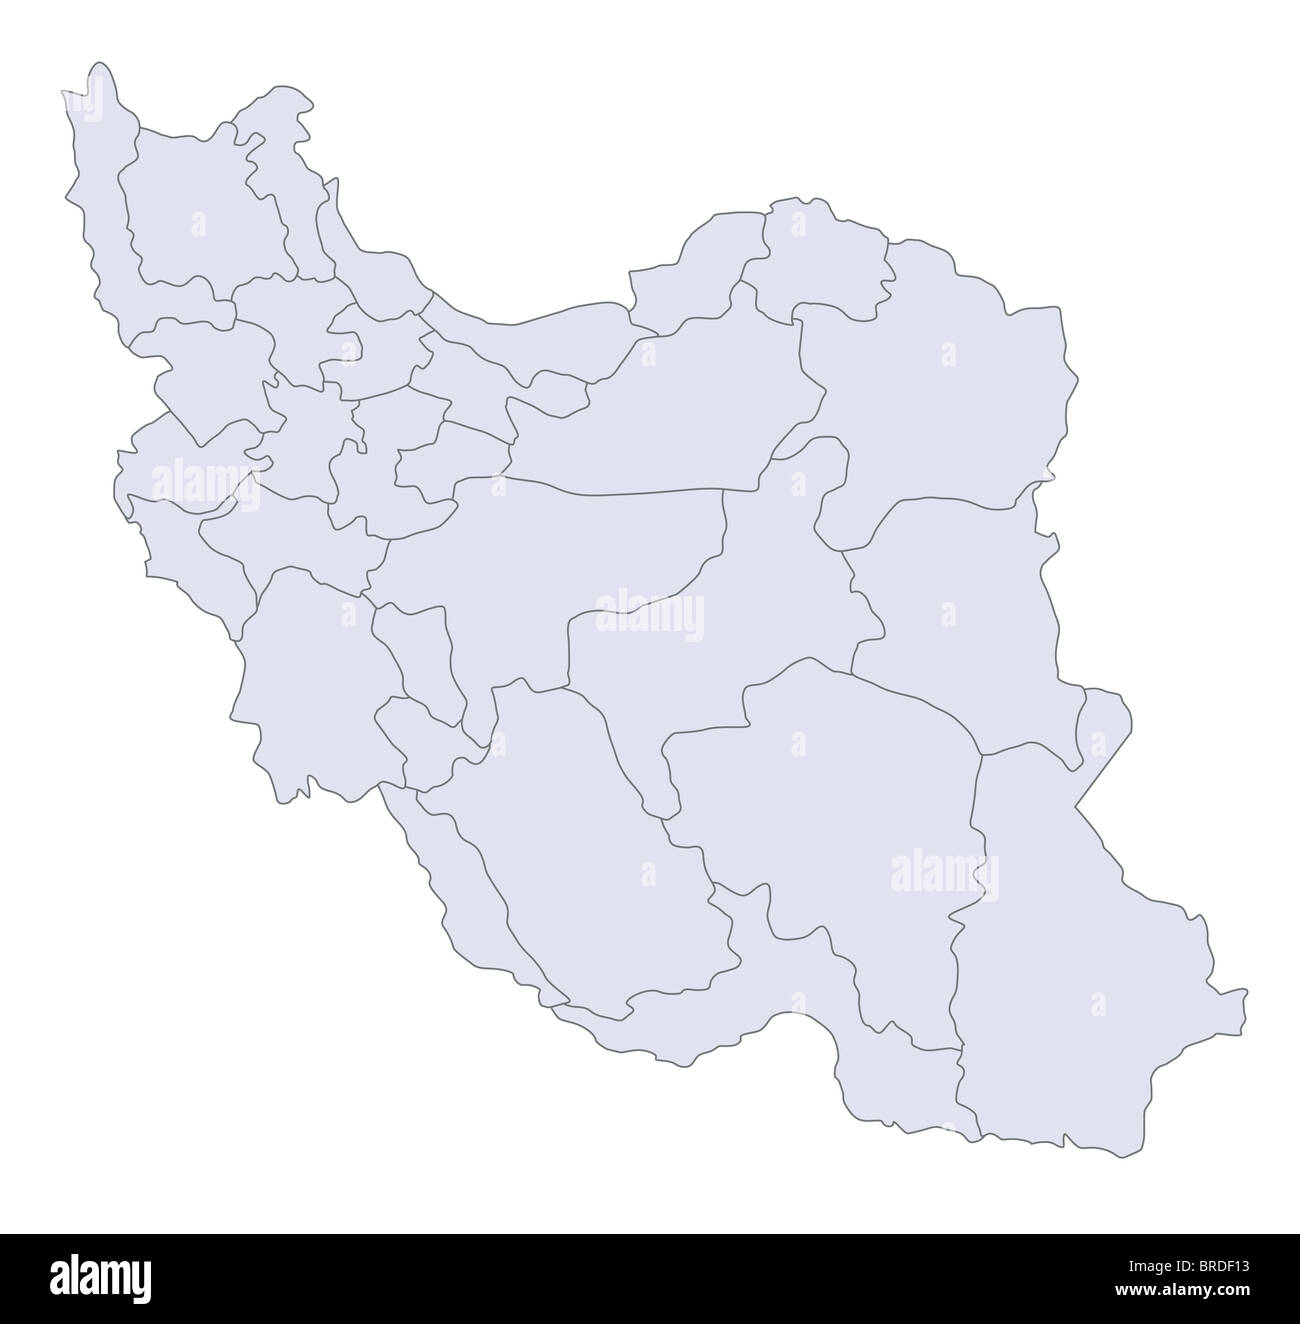 Stylized map of iran showing the different provinces Stock Photo